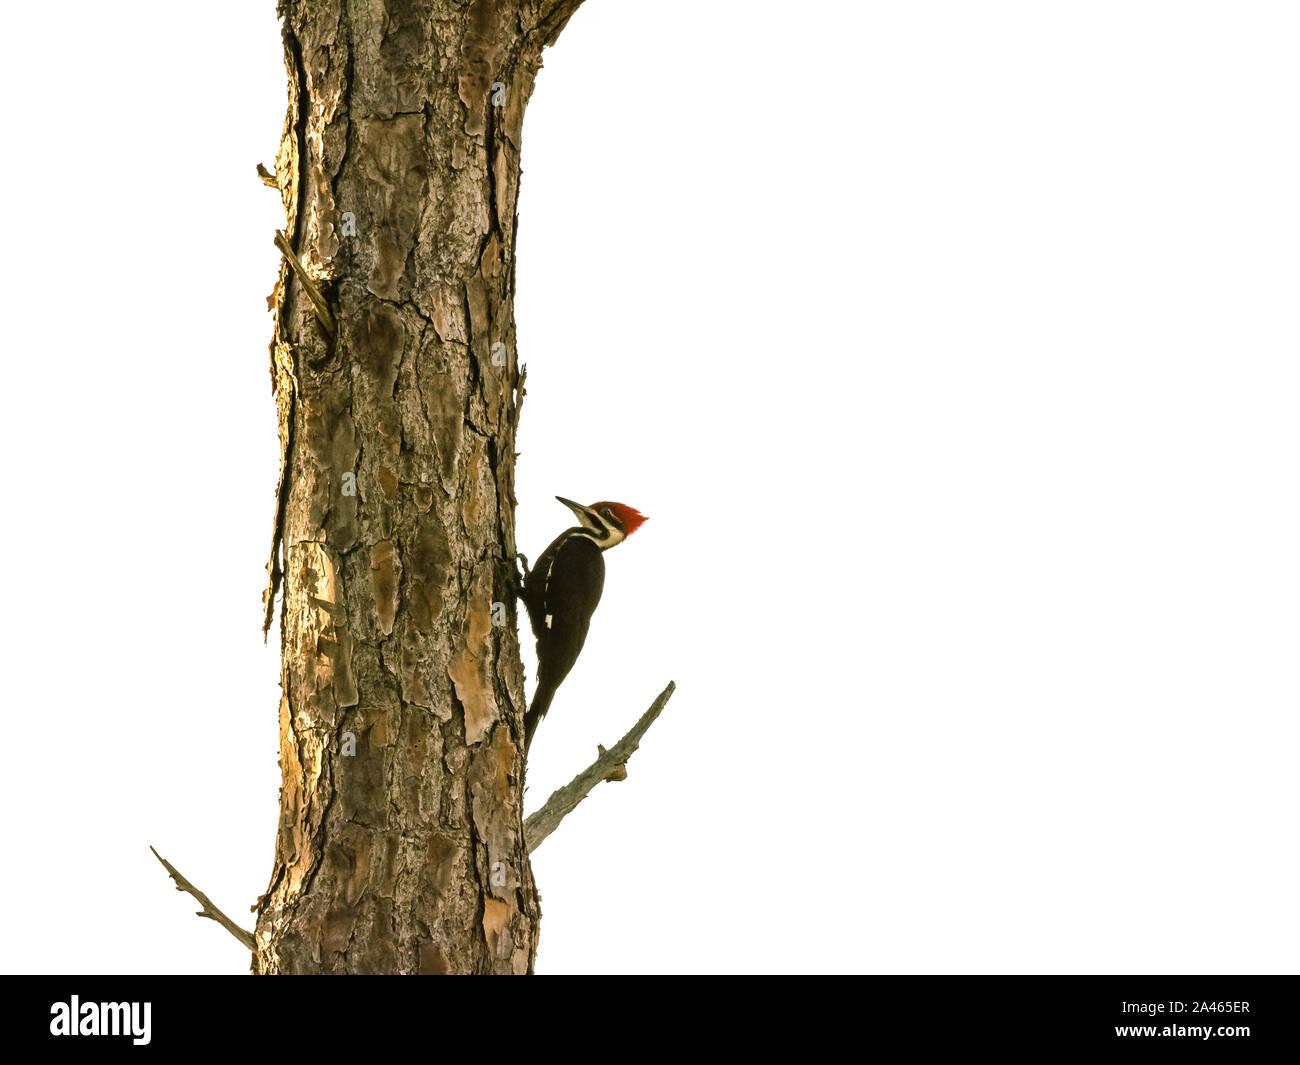 Piliated Woodpecker Clinging to a Pine Tree in Florida Stock Photo